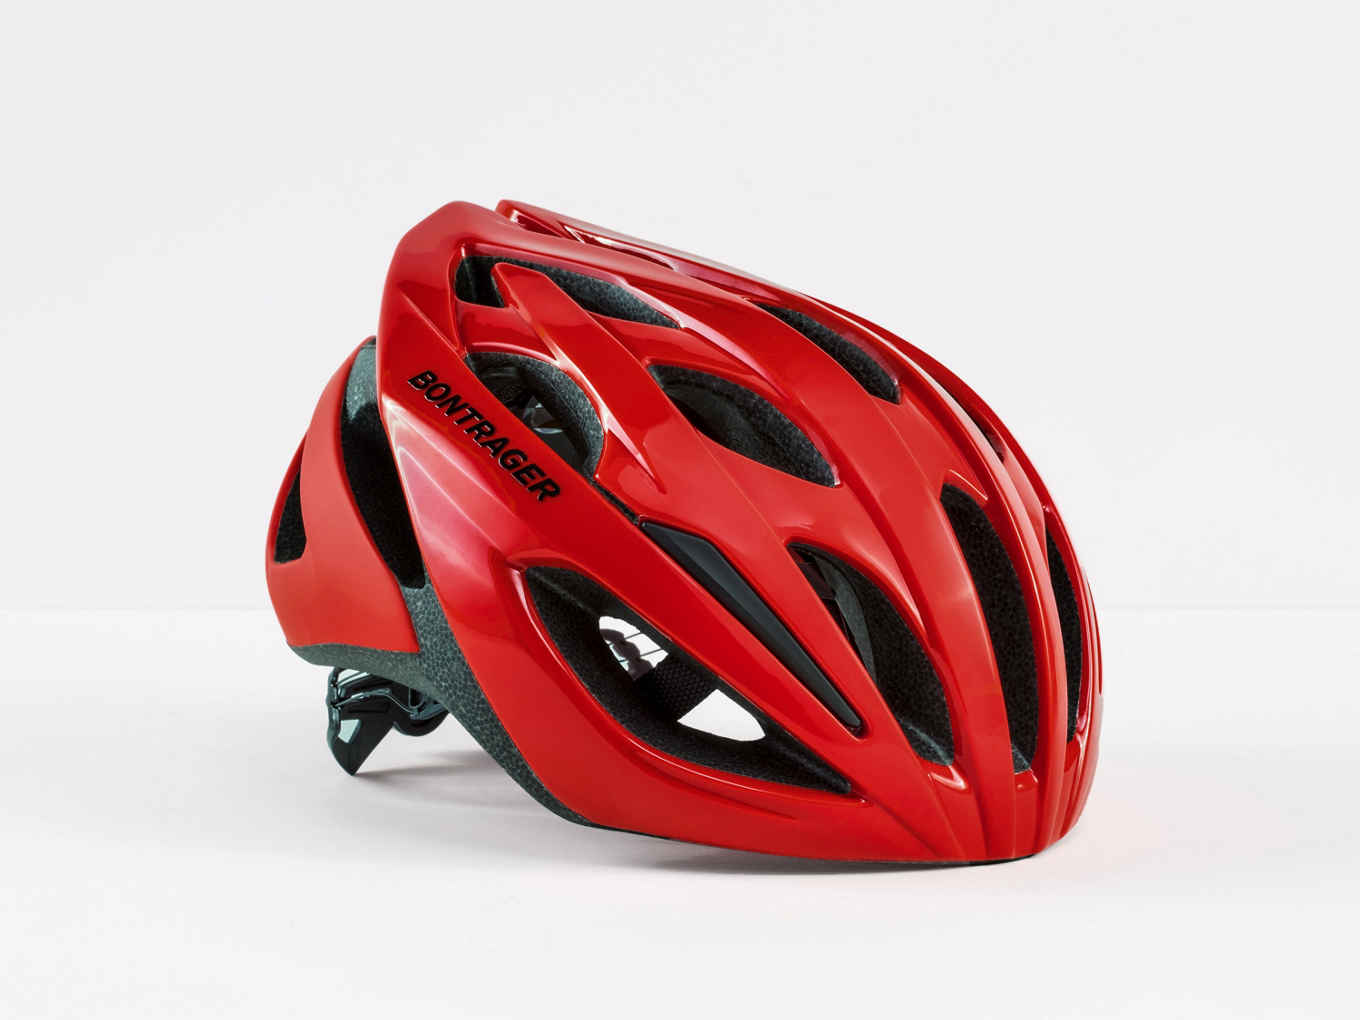 [View 25+] Best Bicycle Helmet For Large Heads